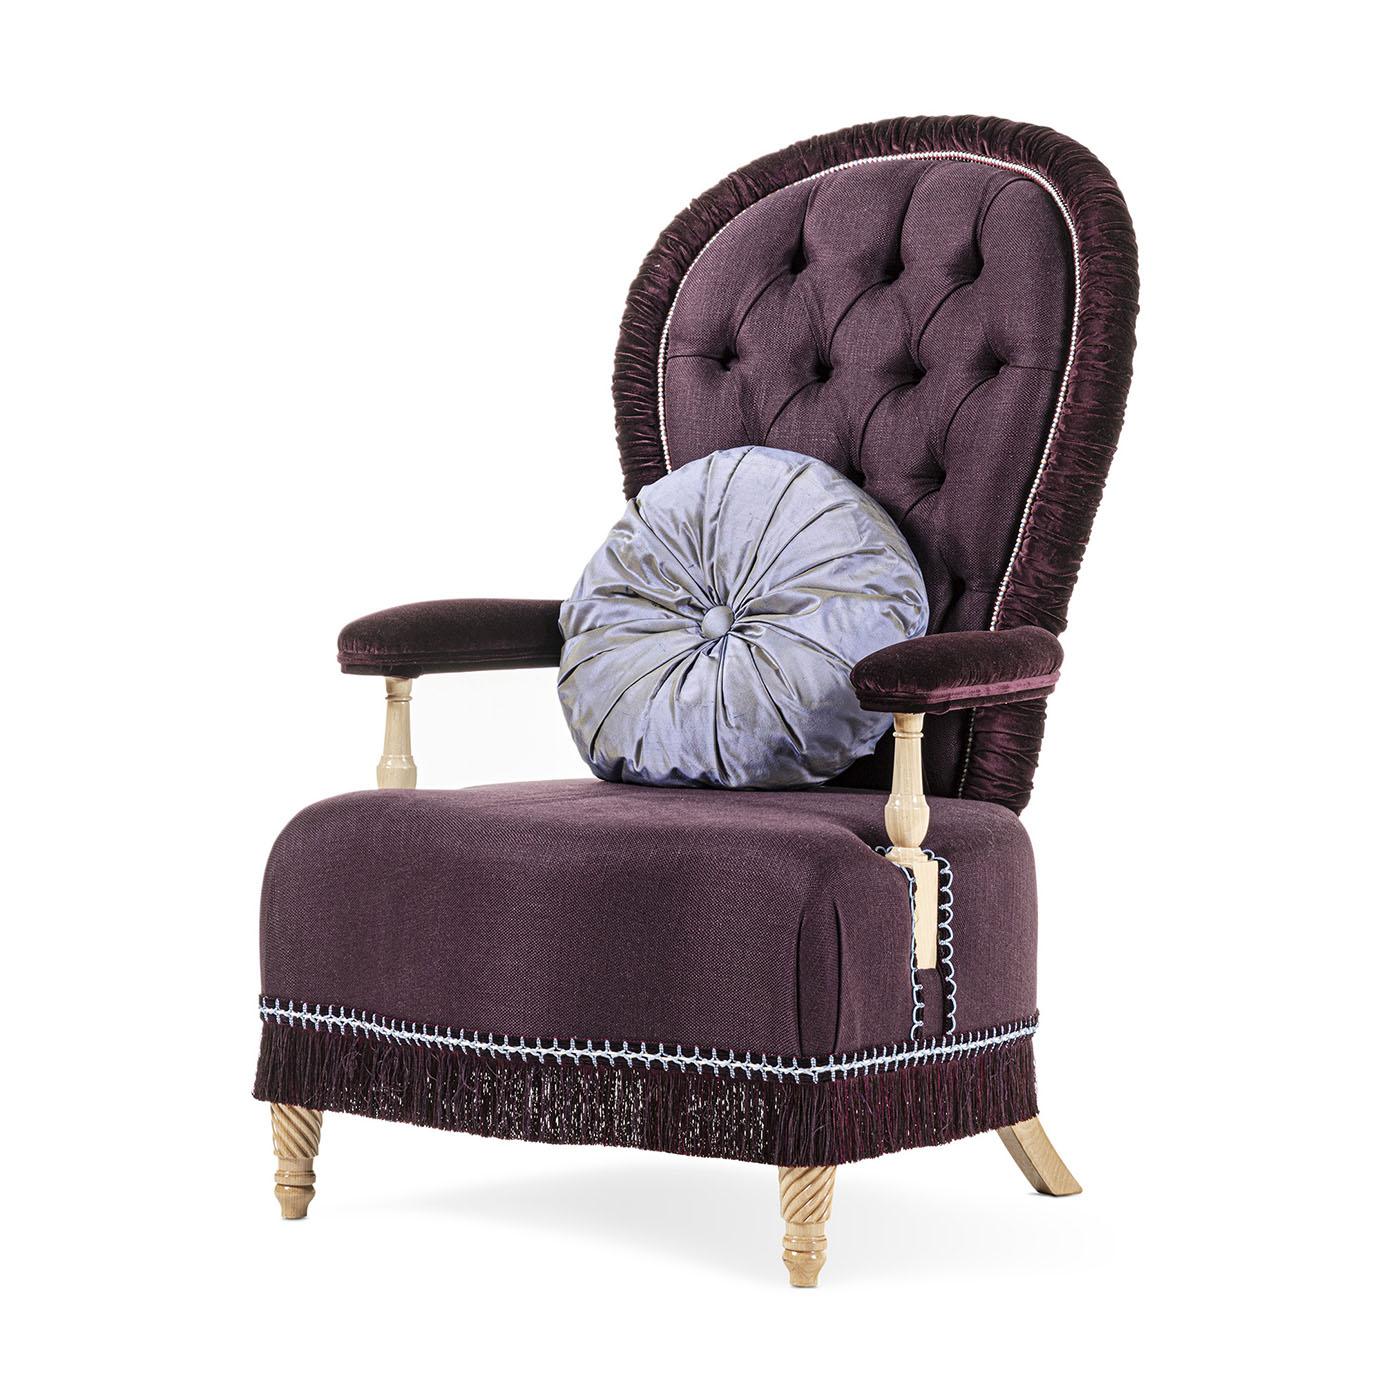 This comfortable armchair is upholstered in linen and velvet with a natural finish. Design in its softness to make anyone feel a priceless sensation. The pillow is included as per the photo.